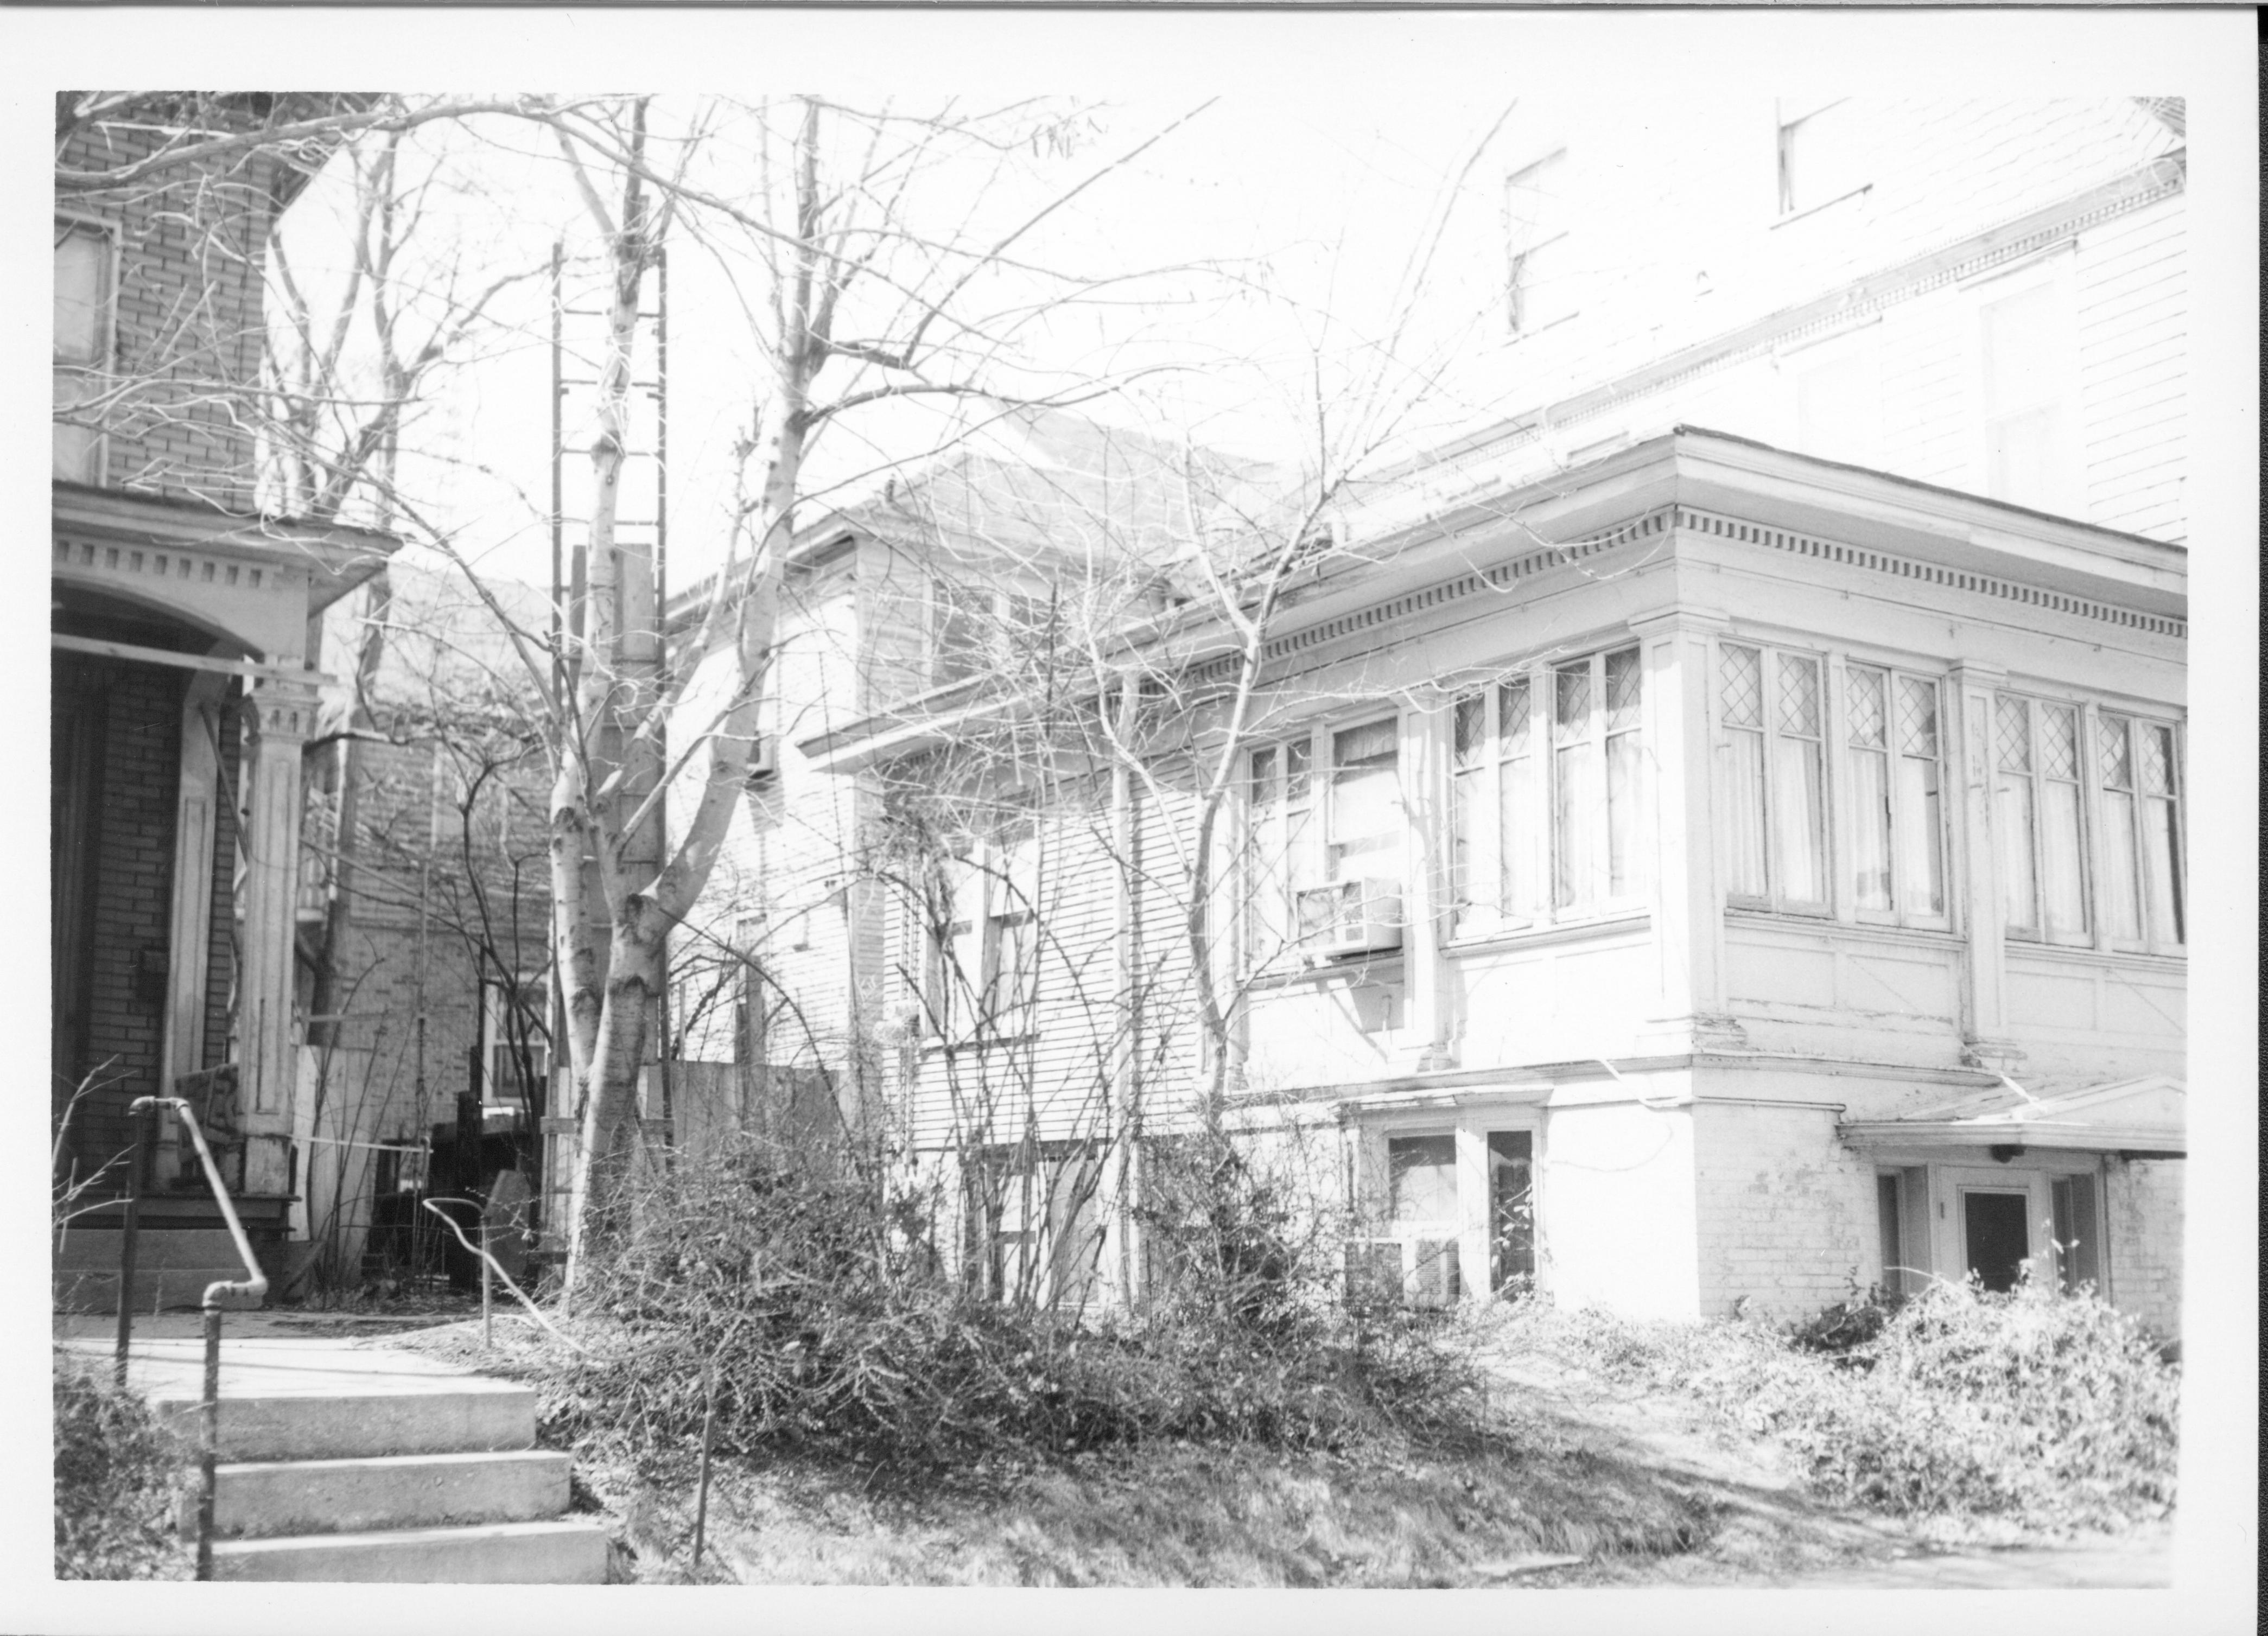 House owned by Dorothea Lennox used for apartments, Block 7, Lots 16 & 15, along Capitol Ave. Second house owned by Dorothea Lennox in background center. House owned by Bernard Bowman left of center. Beedle House at far left. Area is now empty Walters lot. Looking Northwest from 8th Street Lennox, Bowman, Beedle, Capitol Ave. 8th Street